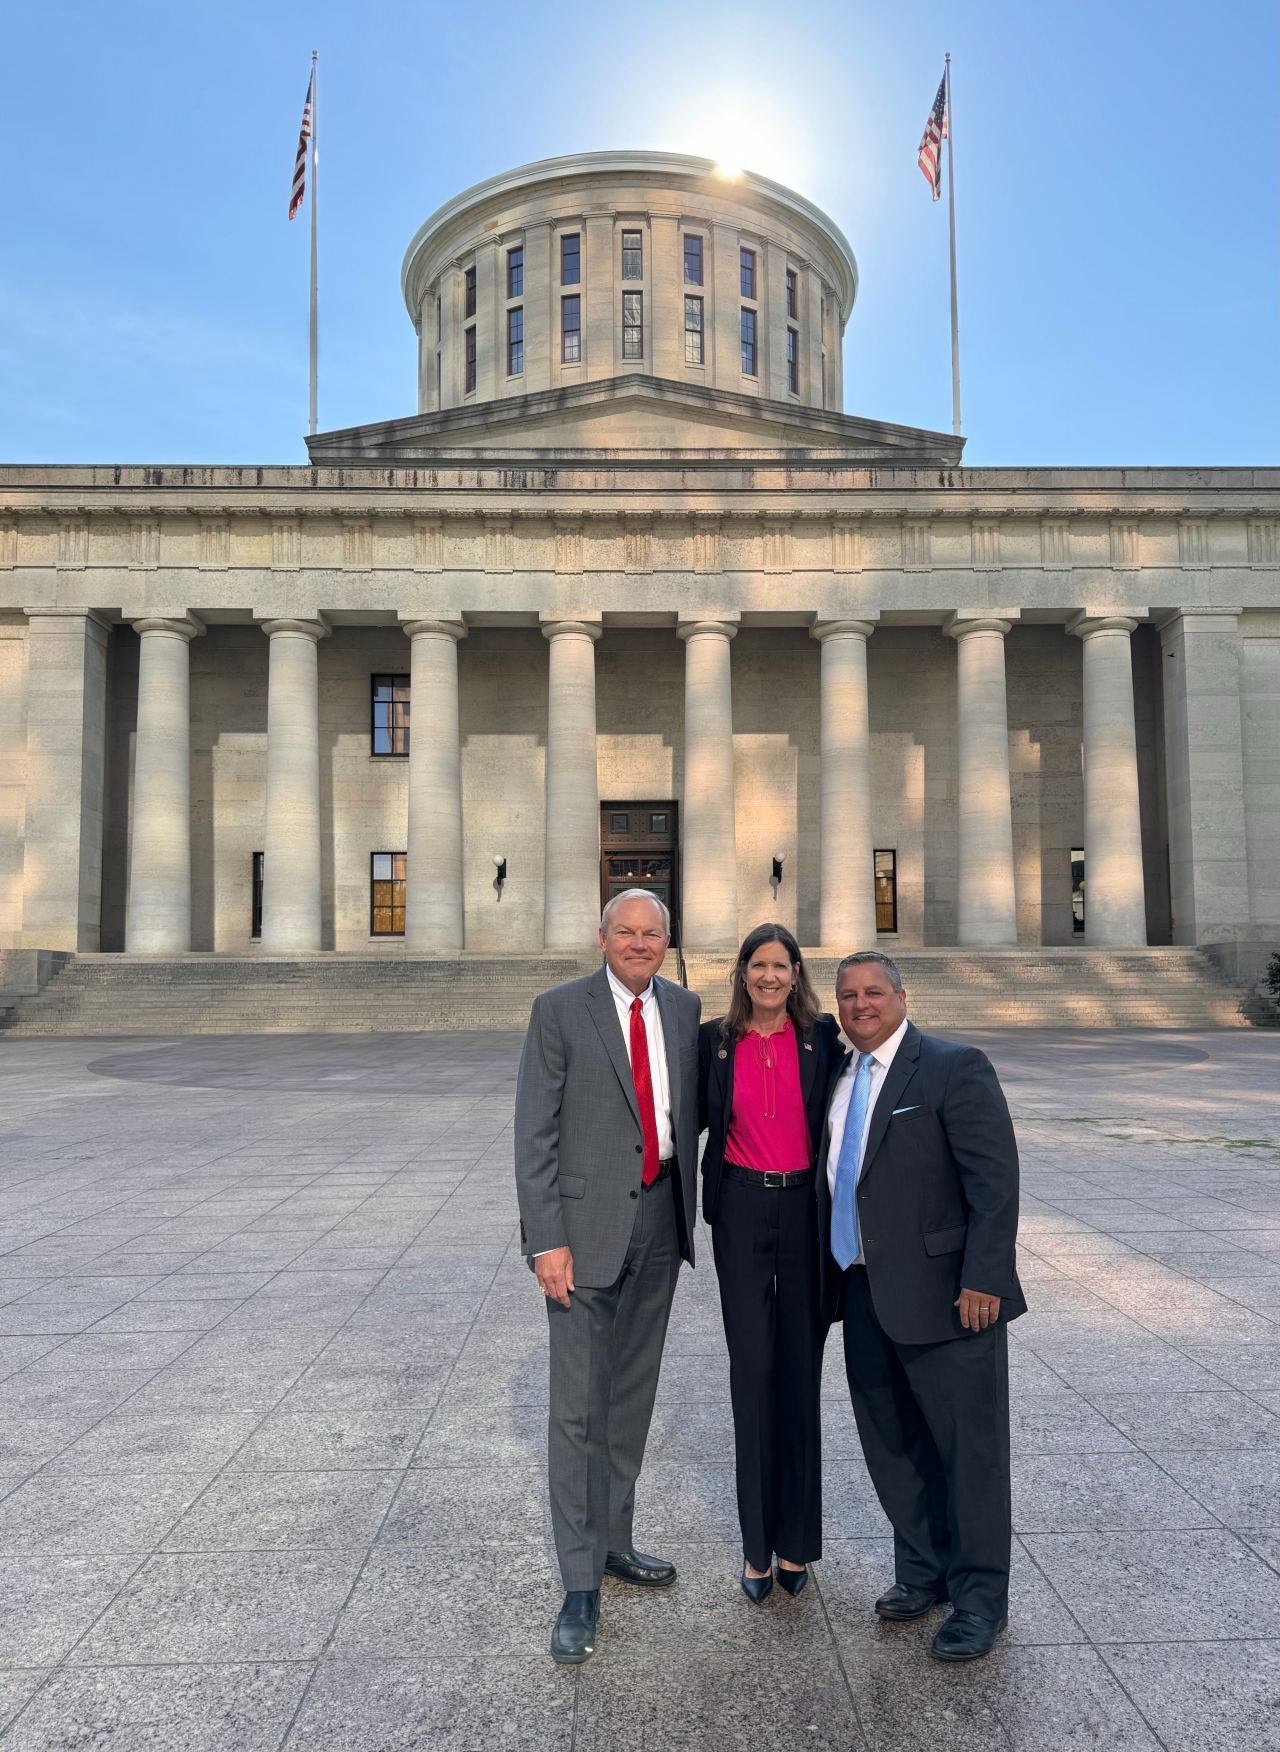 Representative Richardson joined Senators Reineke and Wilkin outside of the Ohio Statehouse for a special project.